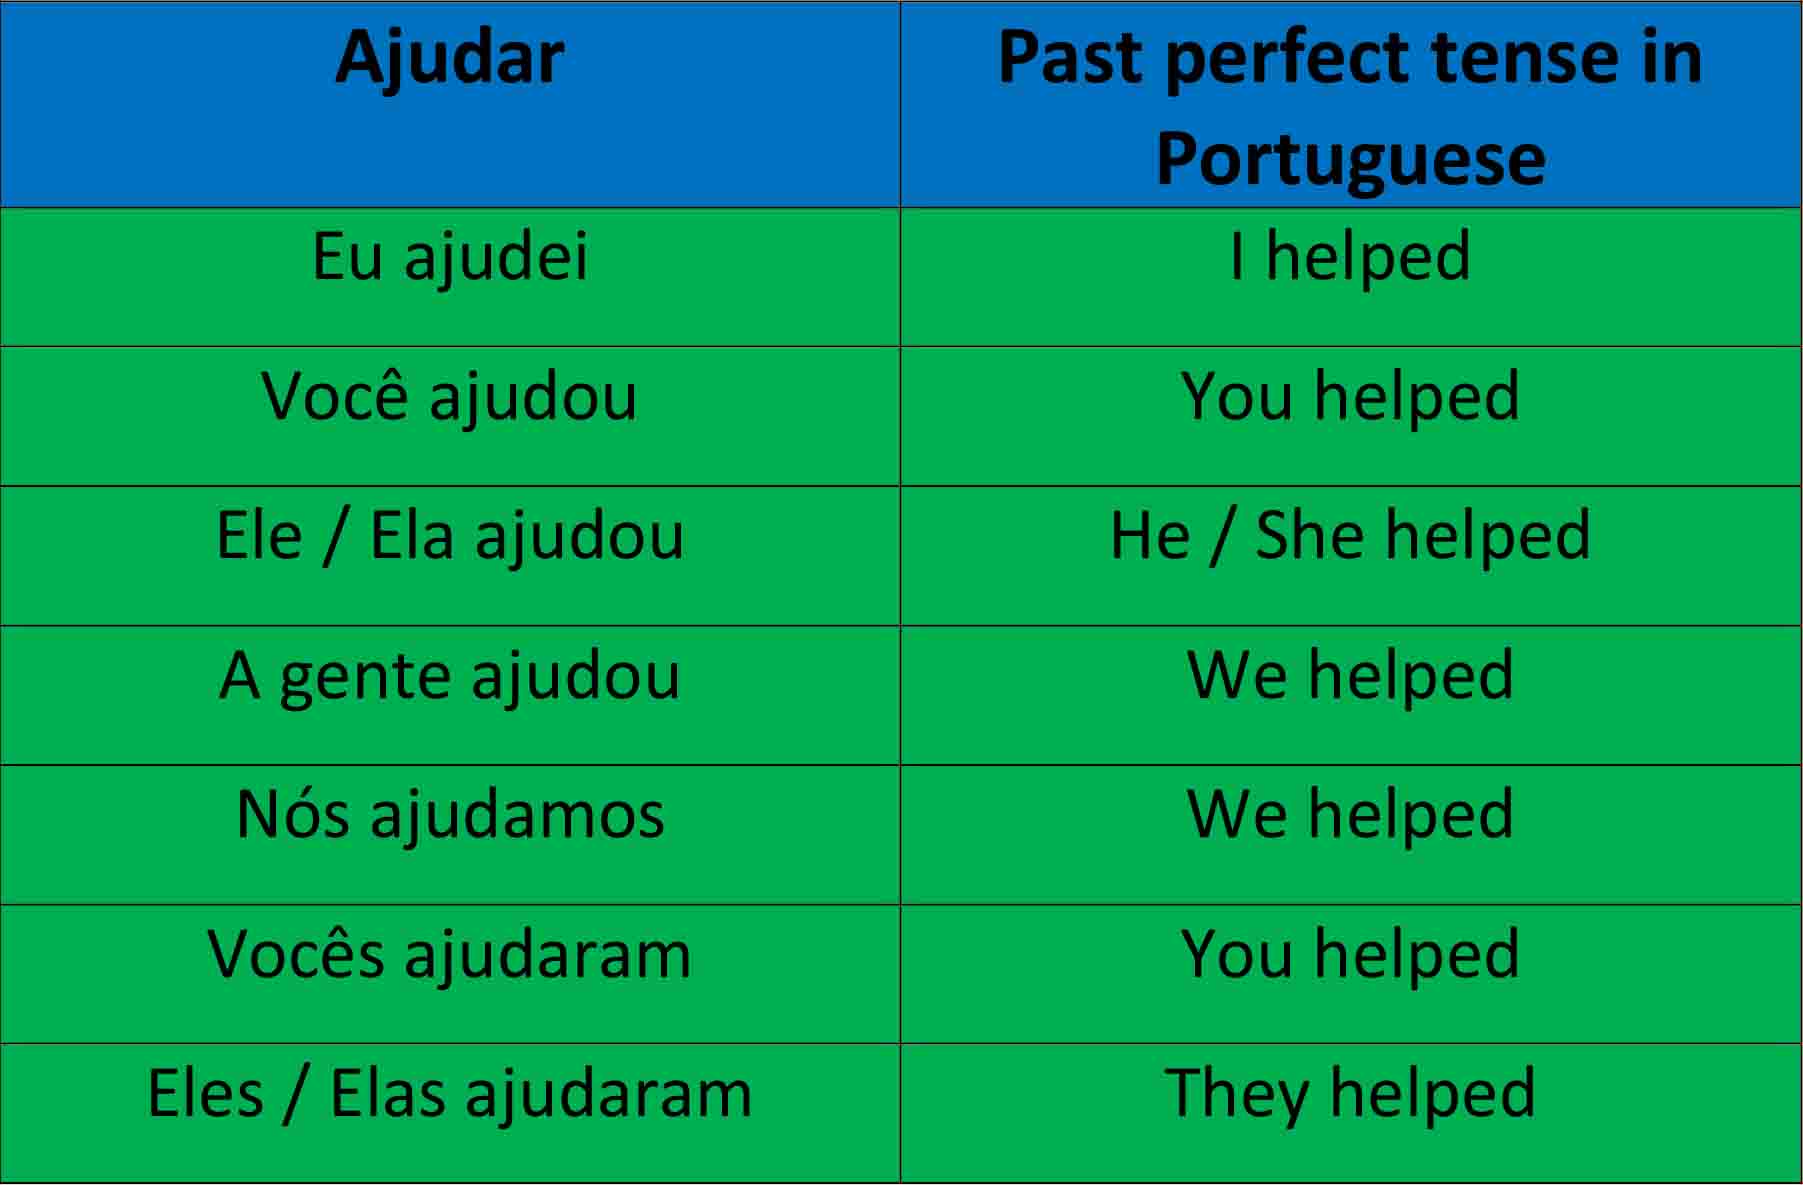 Image combining the verb "ajudar" in Portuguese past perfect tense